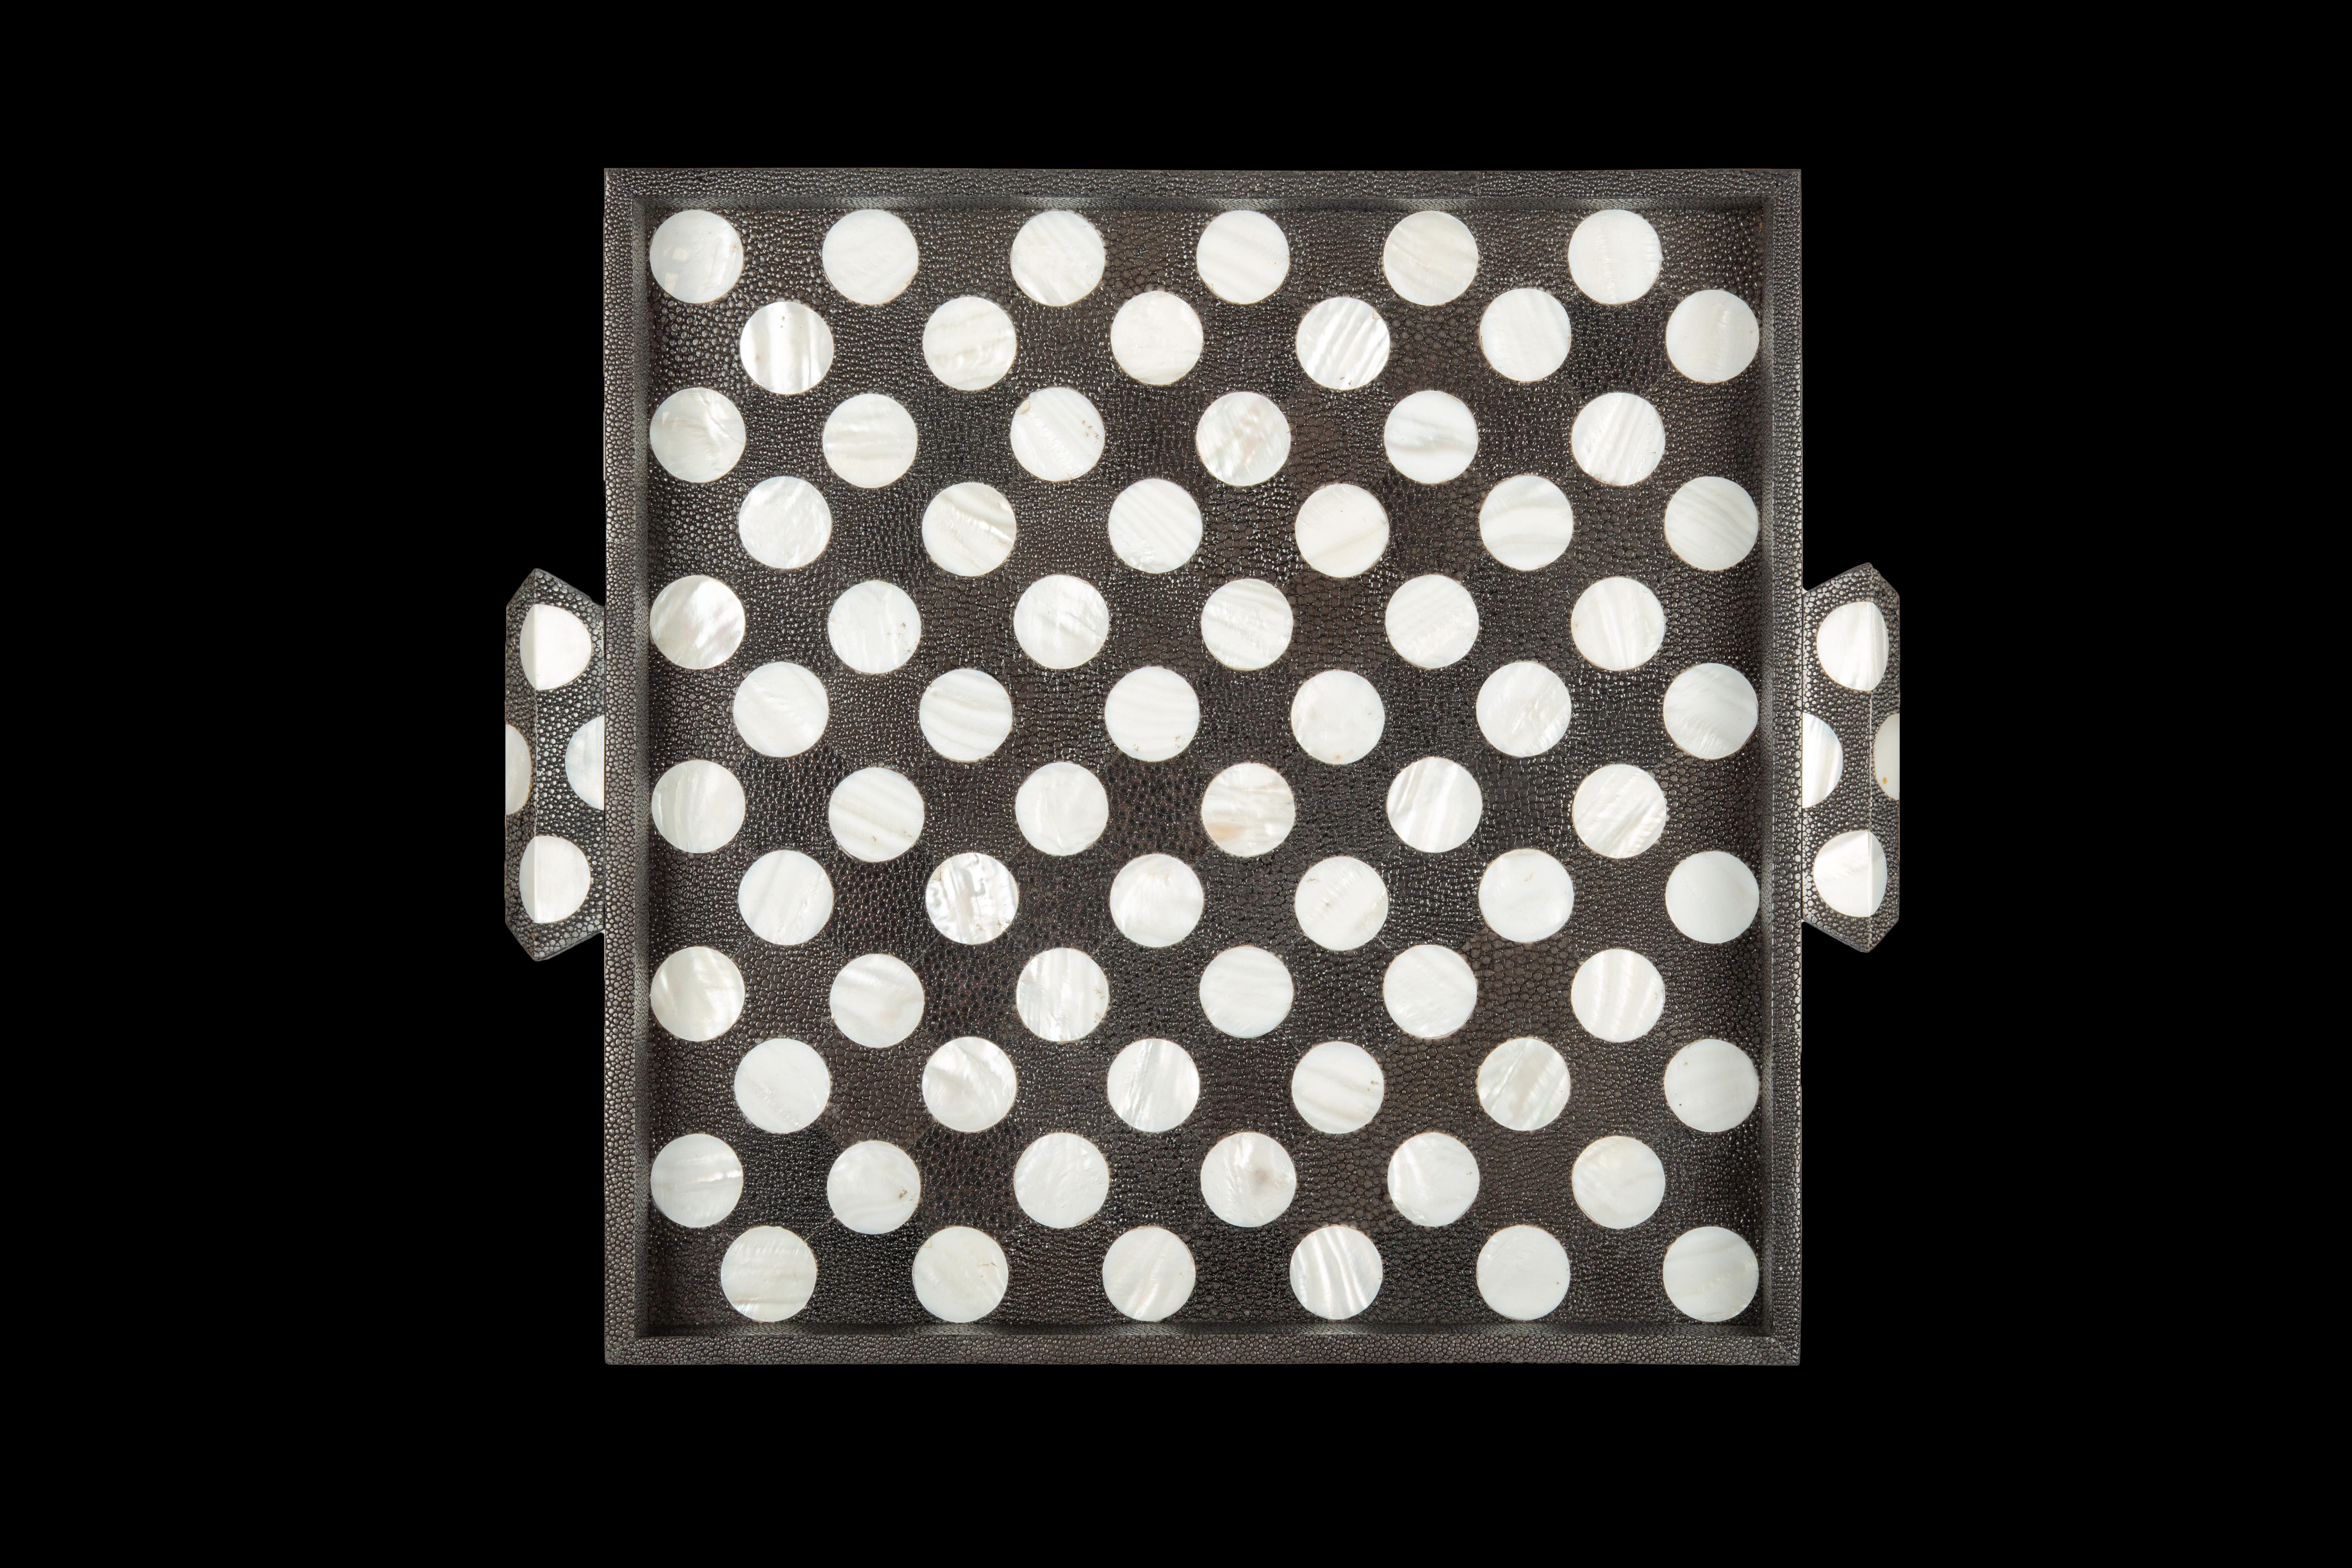 Black and White Polka Dot Shagreen and Mother of Pearl Square Tray

Measures: 12